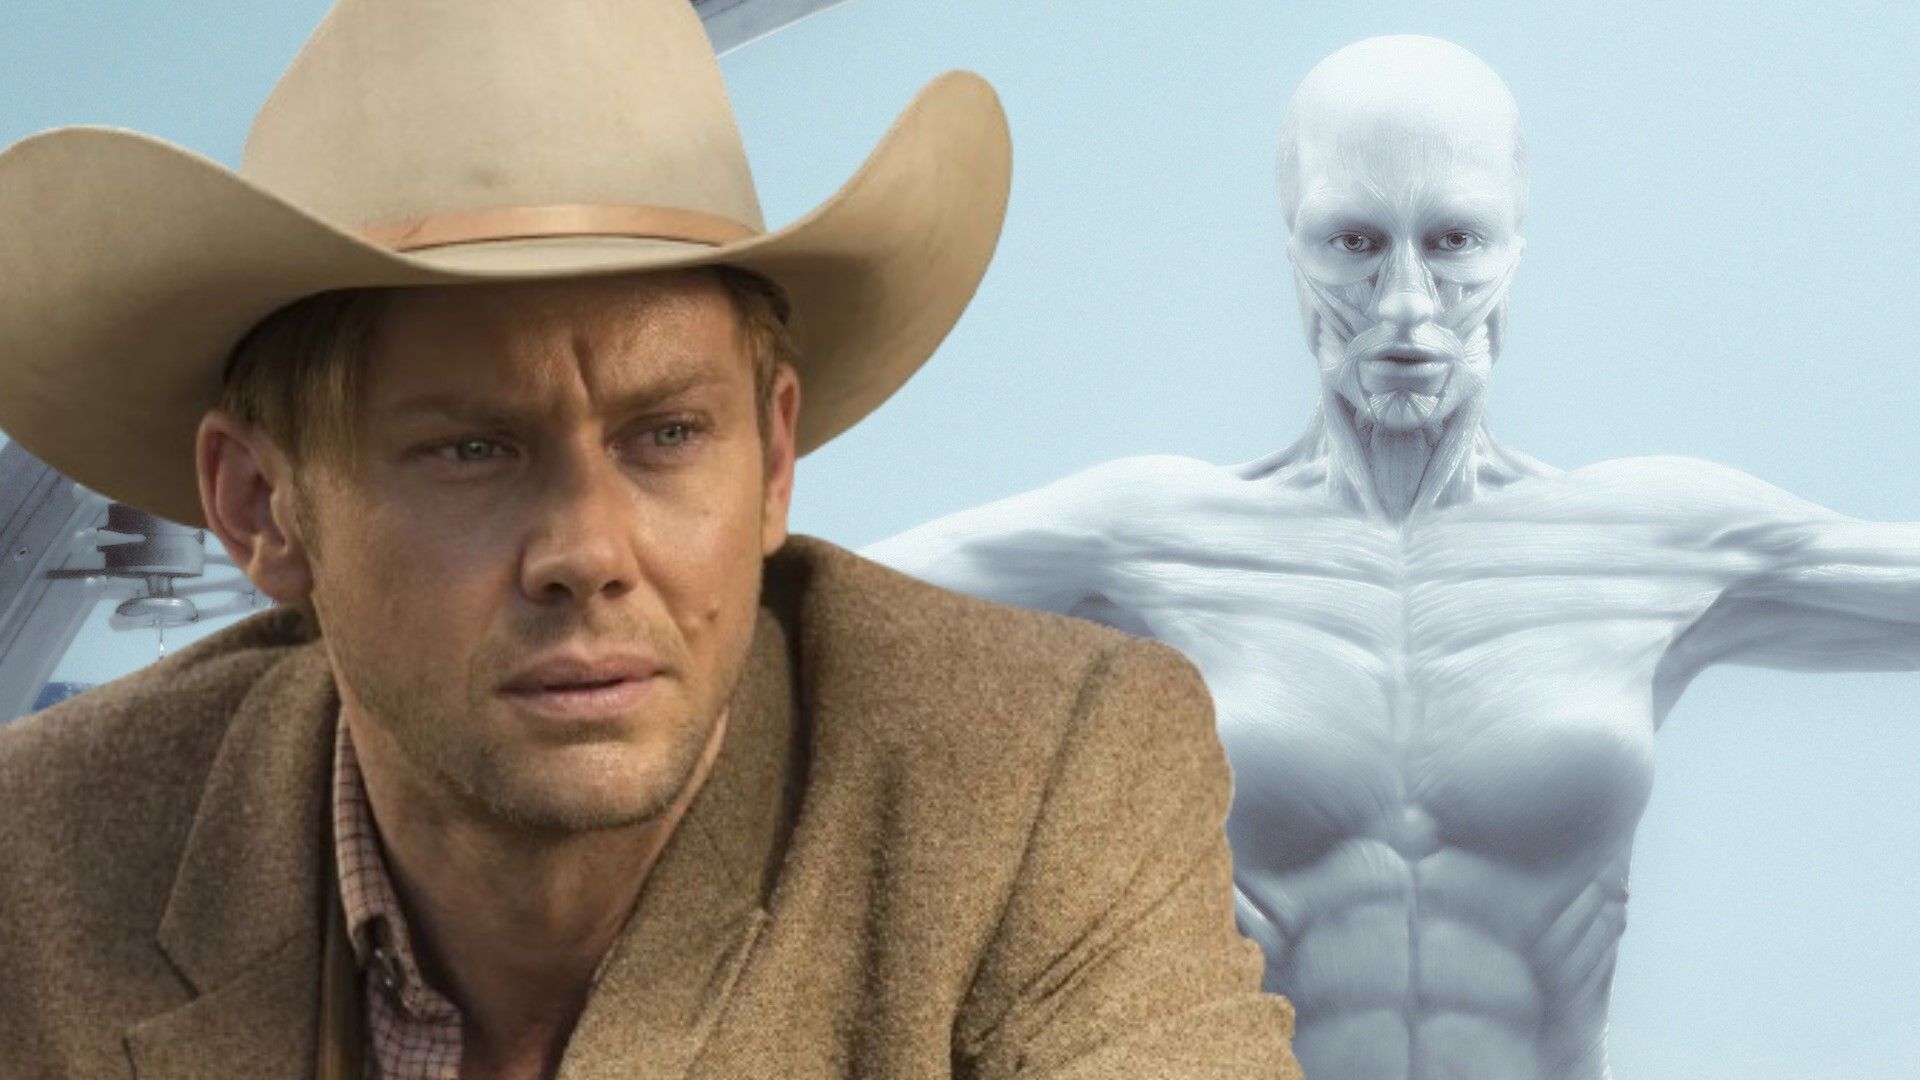 Westworld Star Jimmi Simpson Says Show ‘Absolutely Got Shafted’ with Cancelation